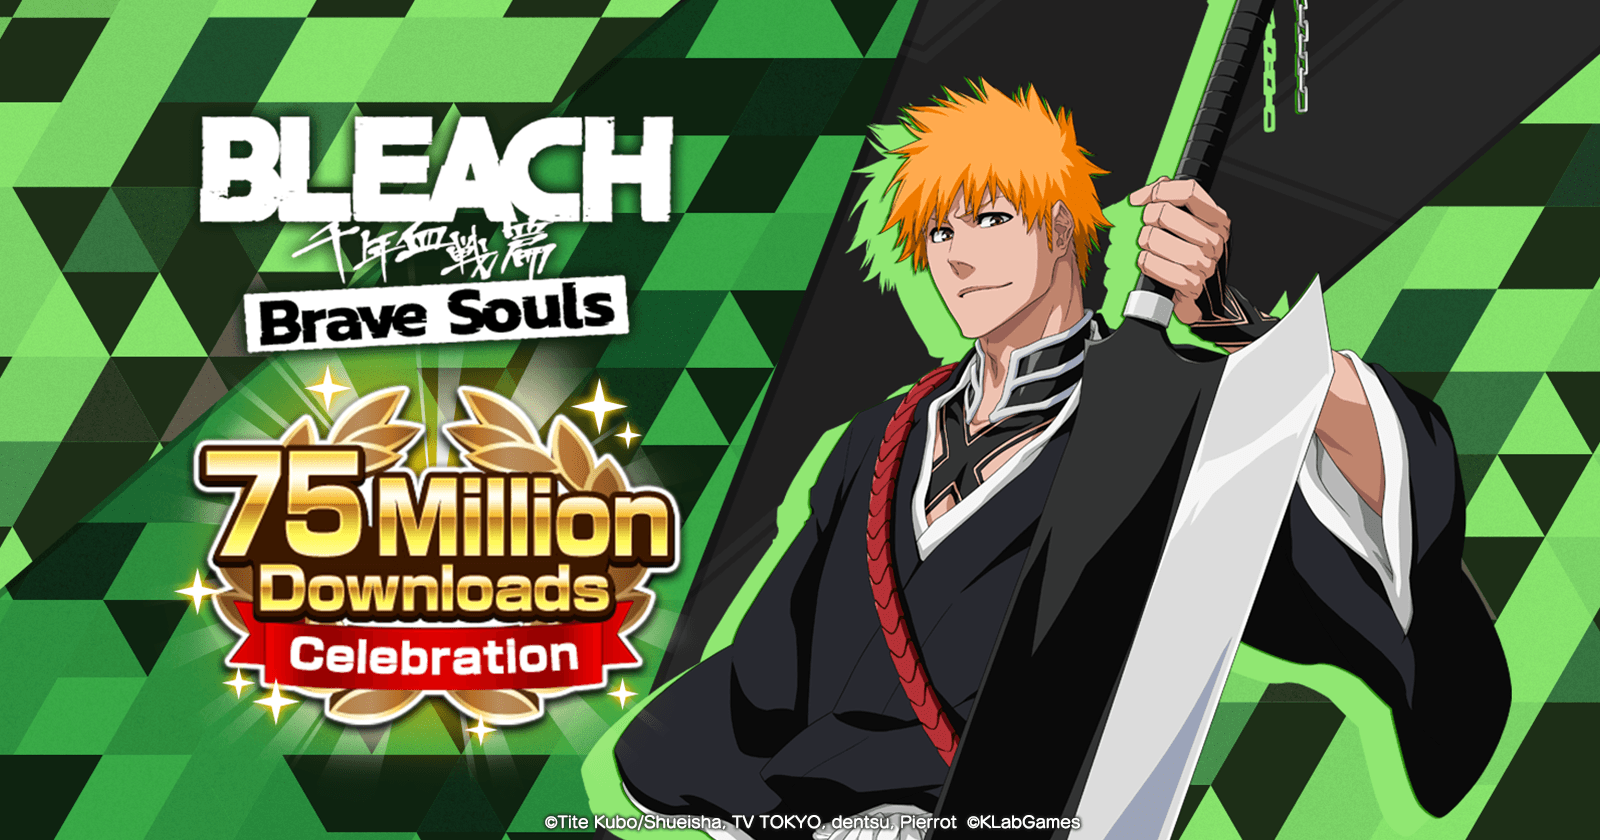 Bleach: Brave Souls' KLab Gets Rights for a My Hero Academia Game